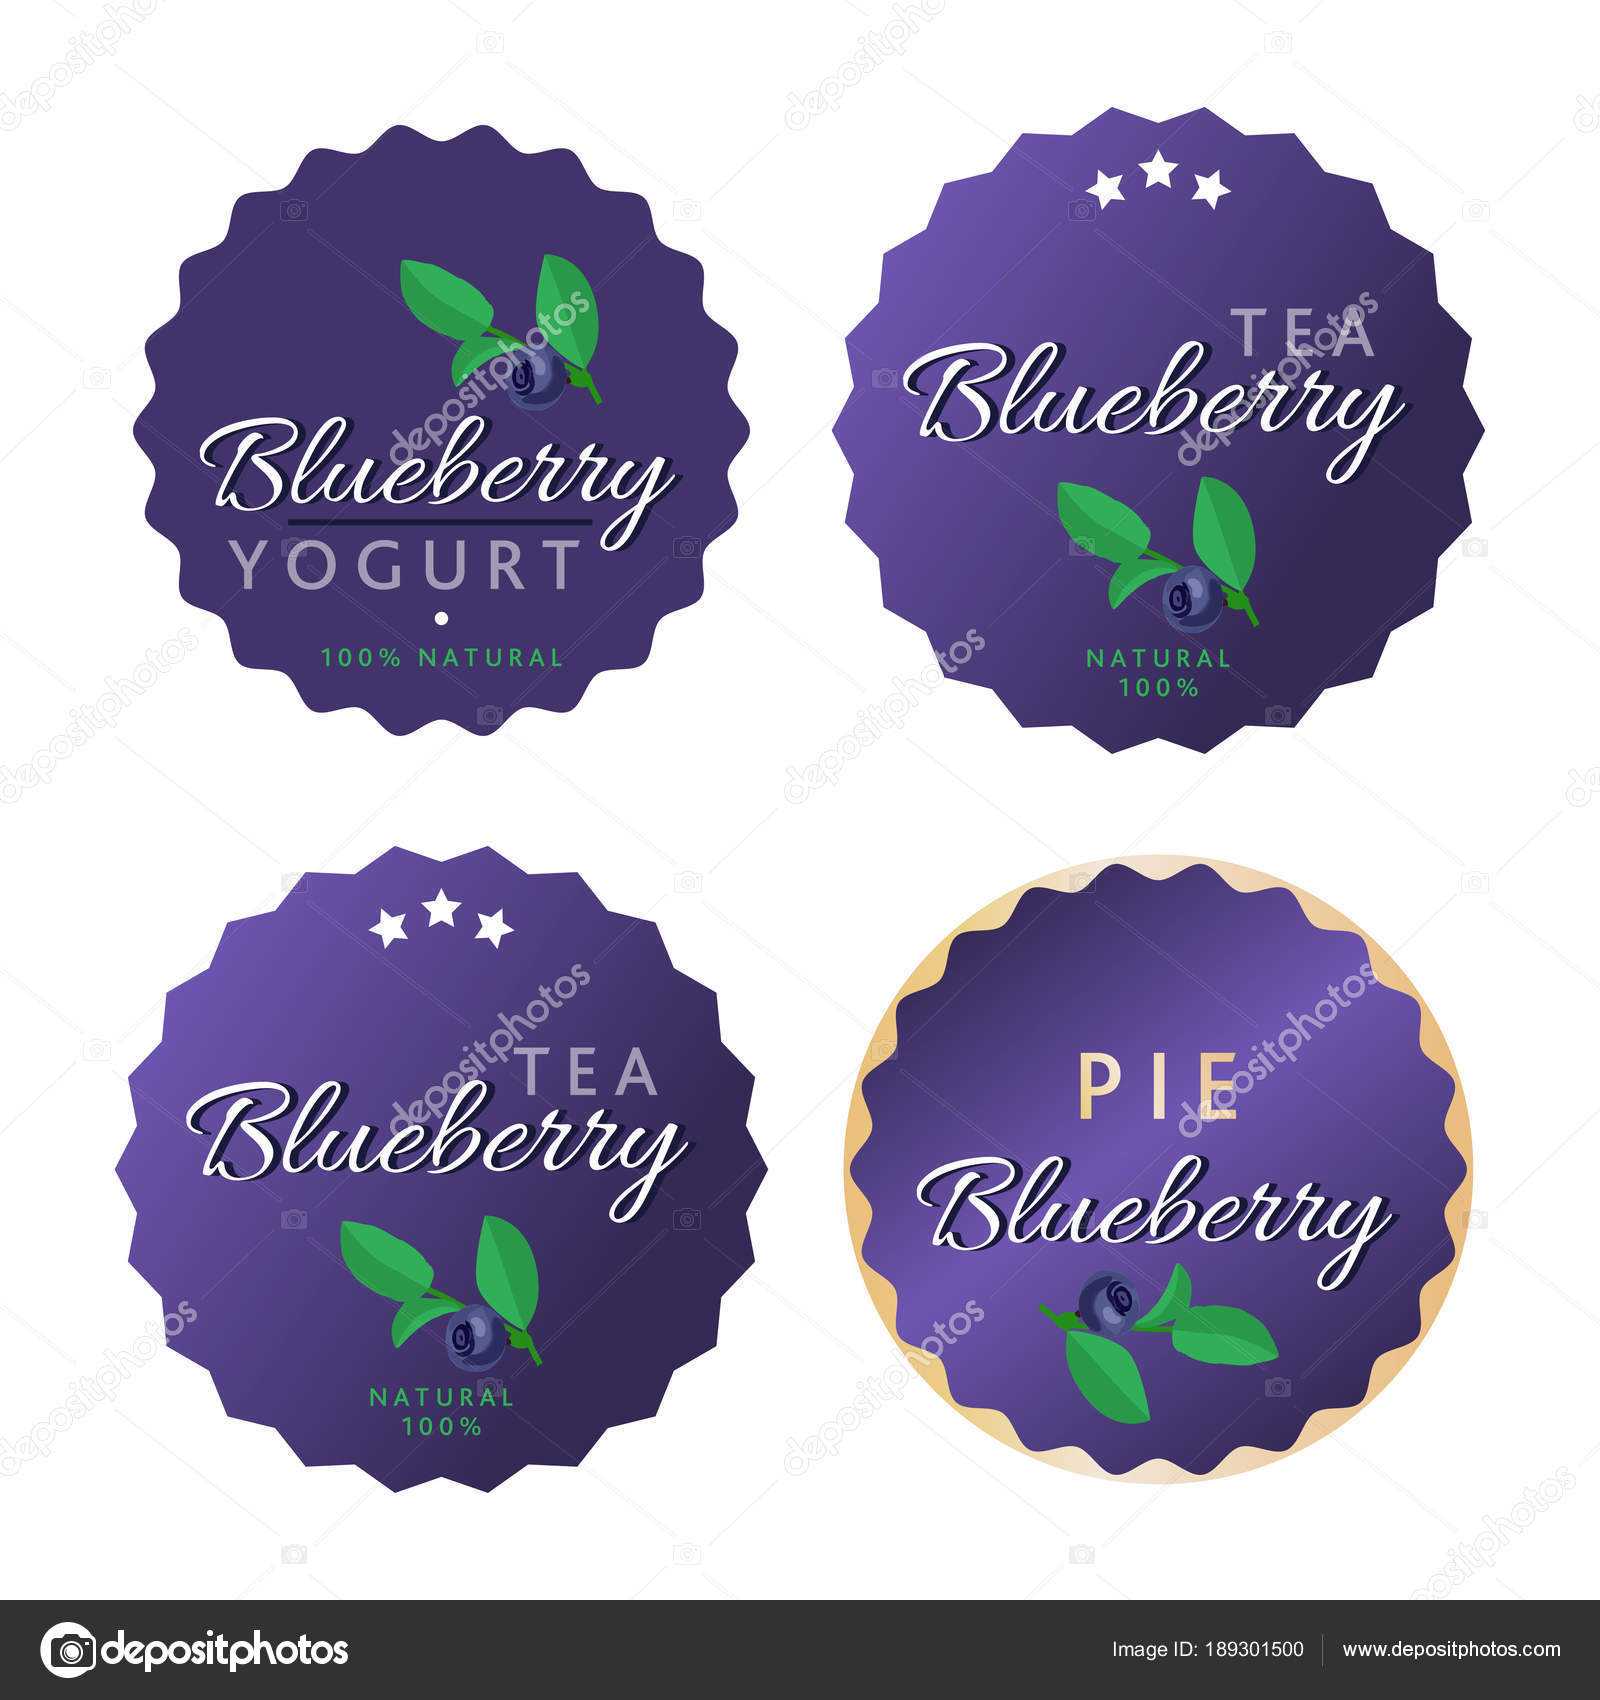 Vector Set Of Product Labels. Blueberry Template For Food With Regard To Food Product Labels Template